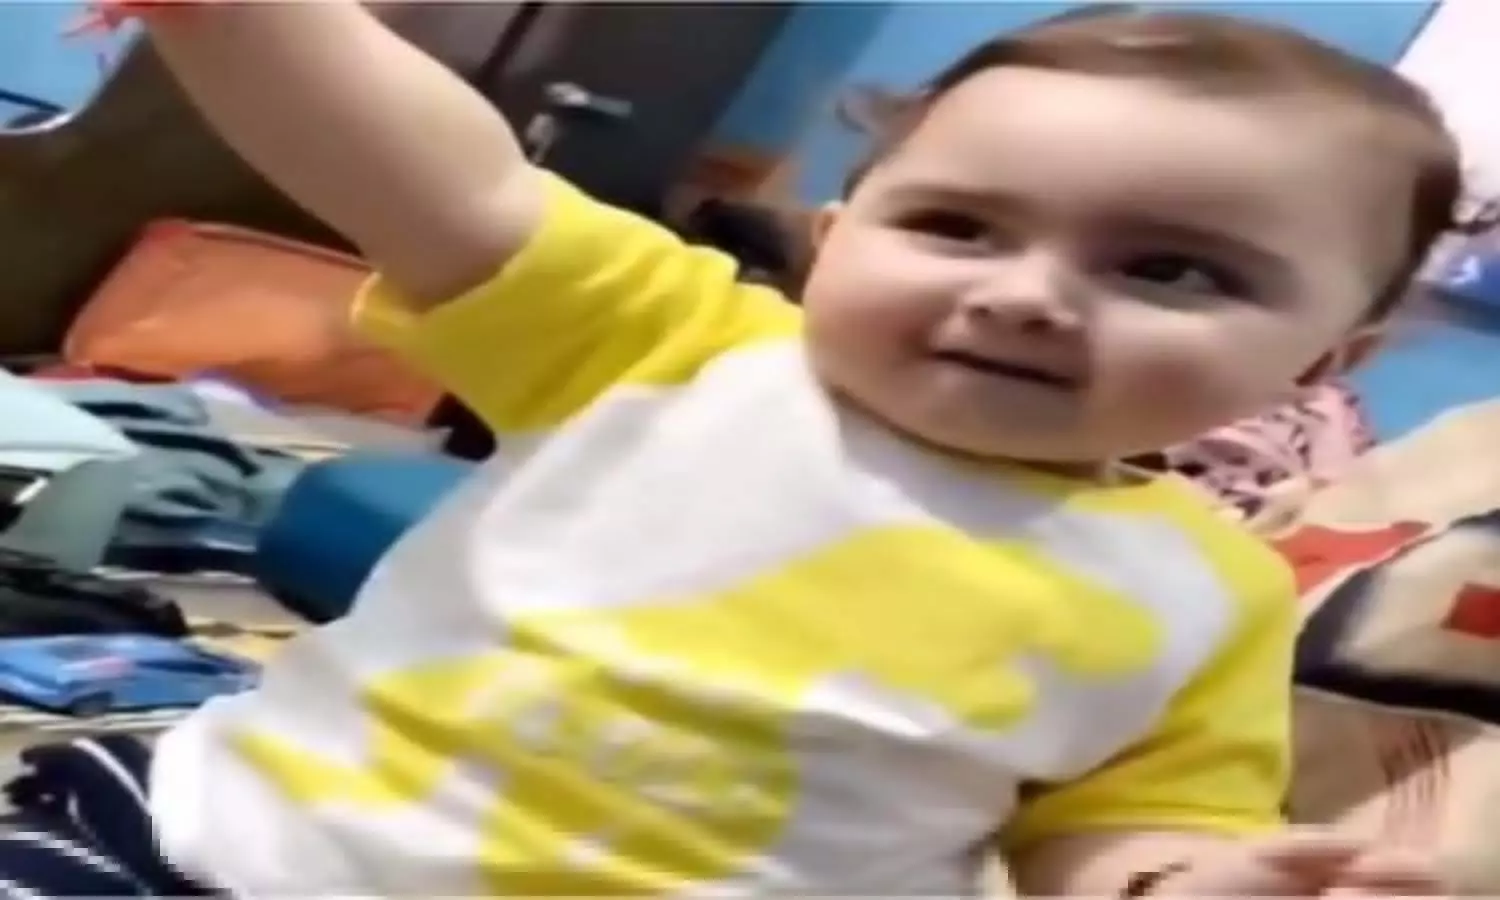 Viral: Lil munchkin goes Oh Ho to the tunes of Jihne Mera Dil Luteya; will surely make you smile